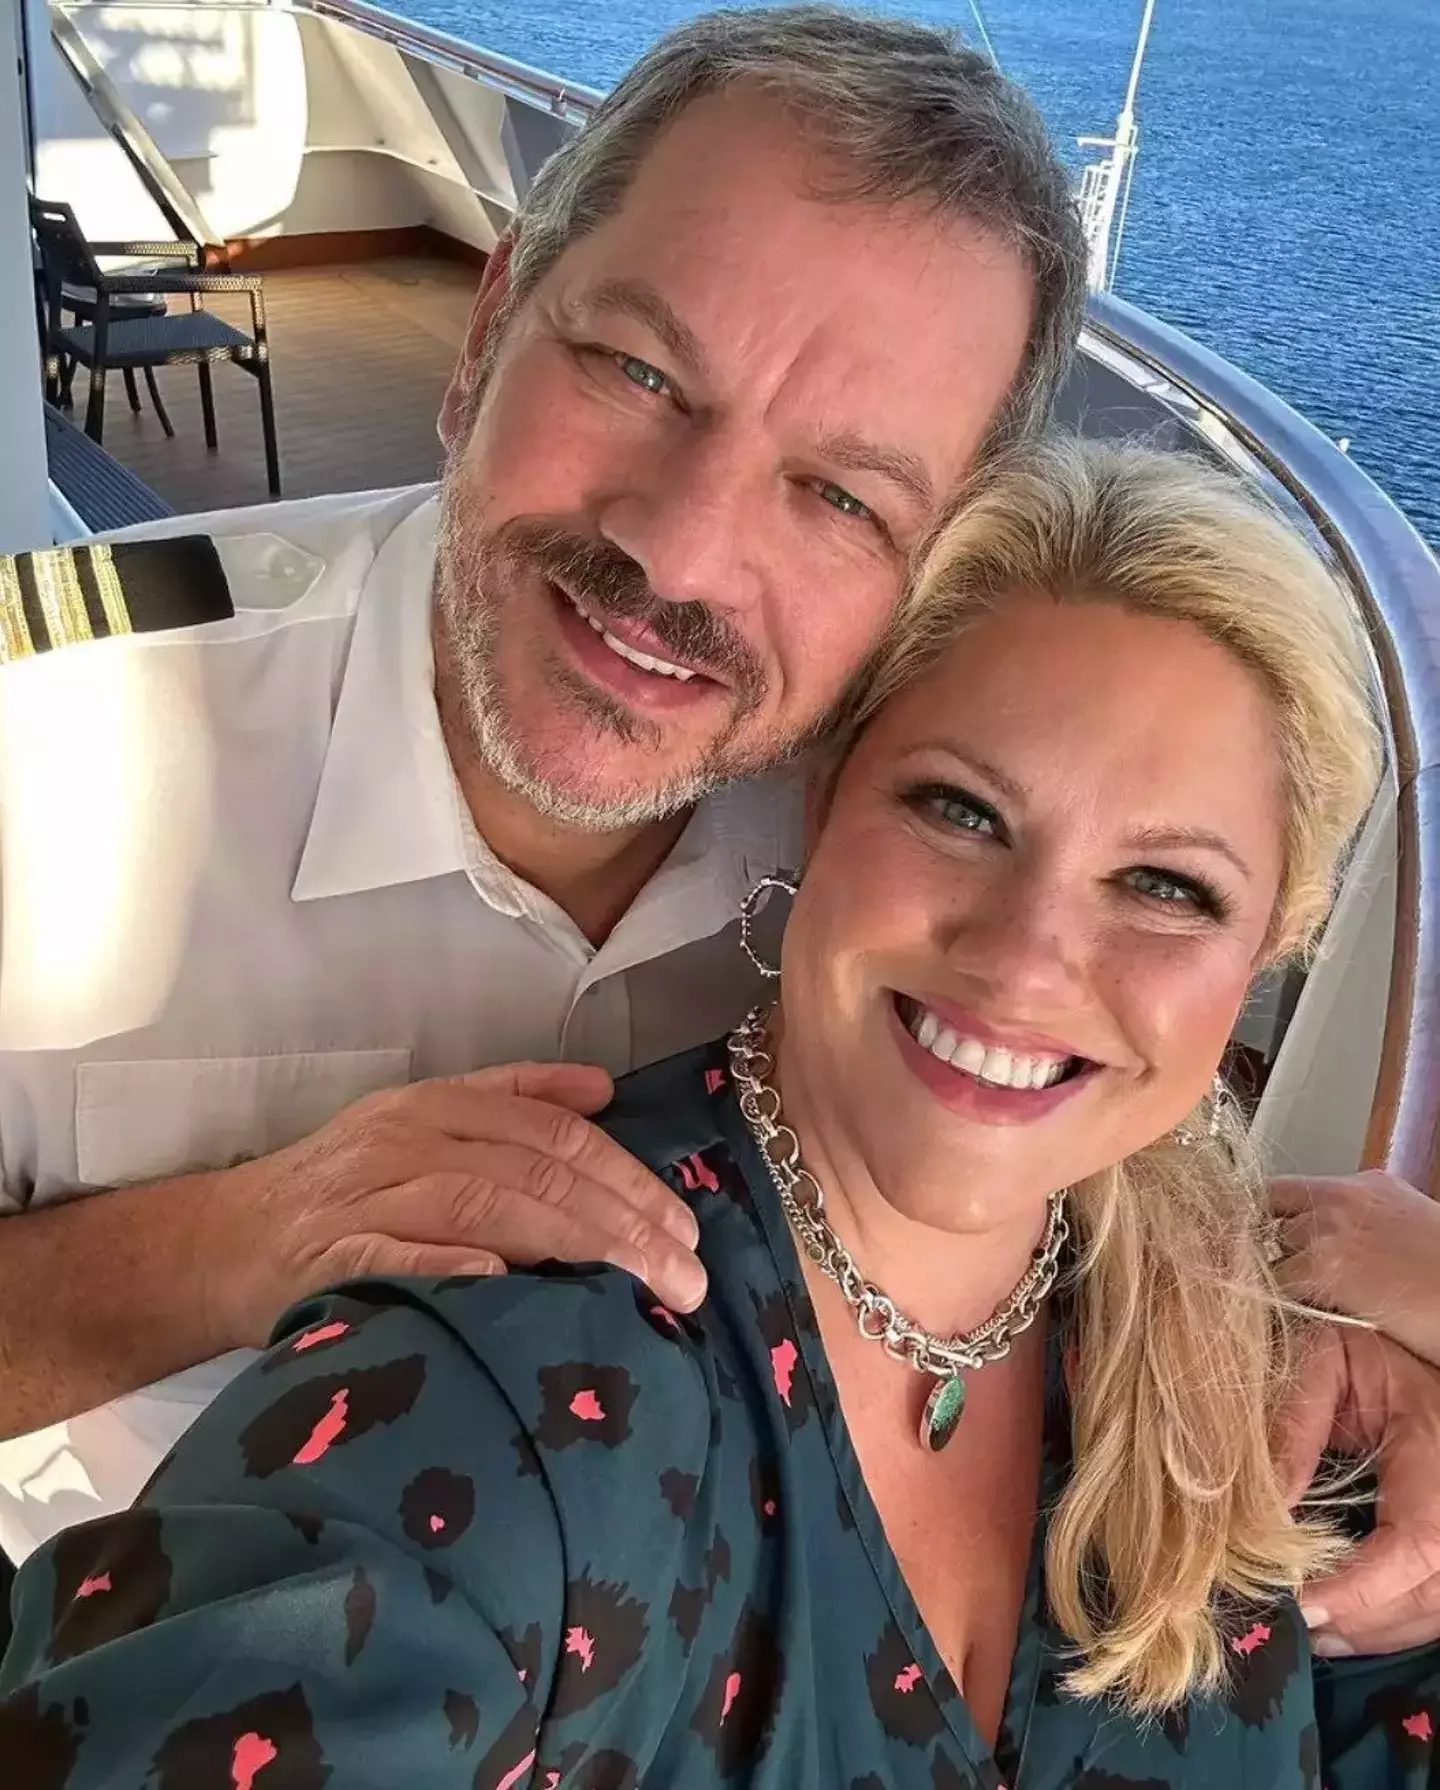 Christine and her husband live on board the cruise ship.